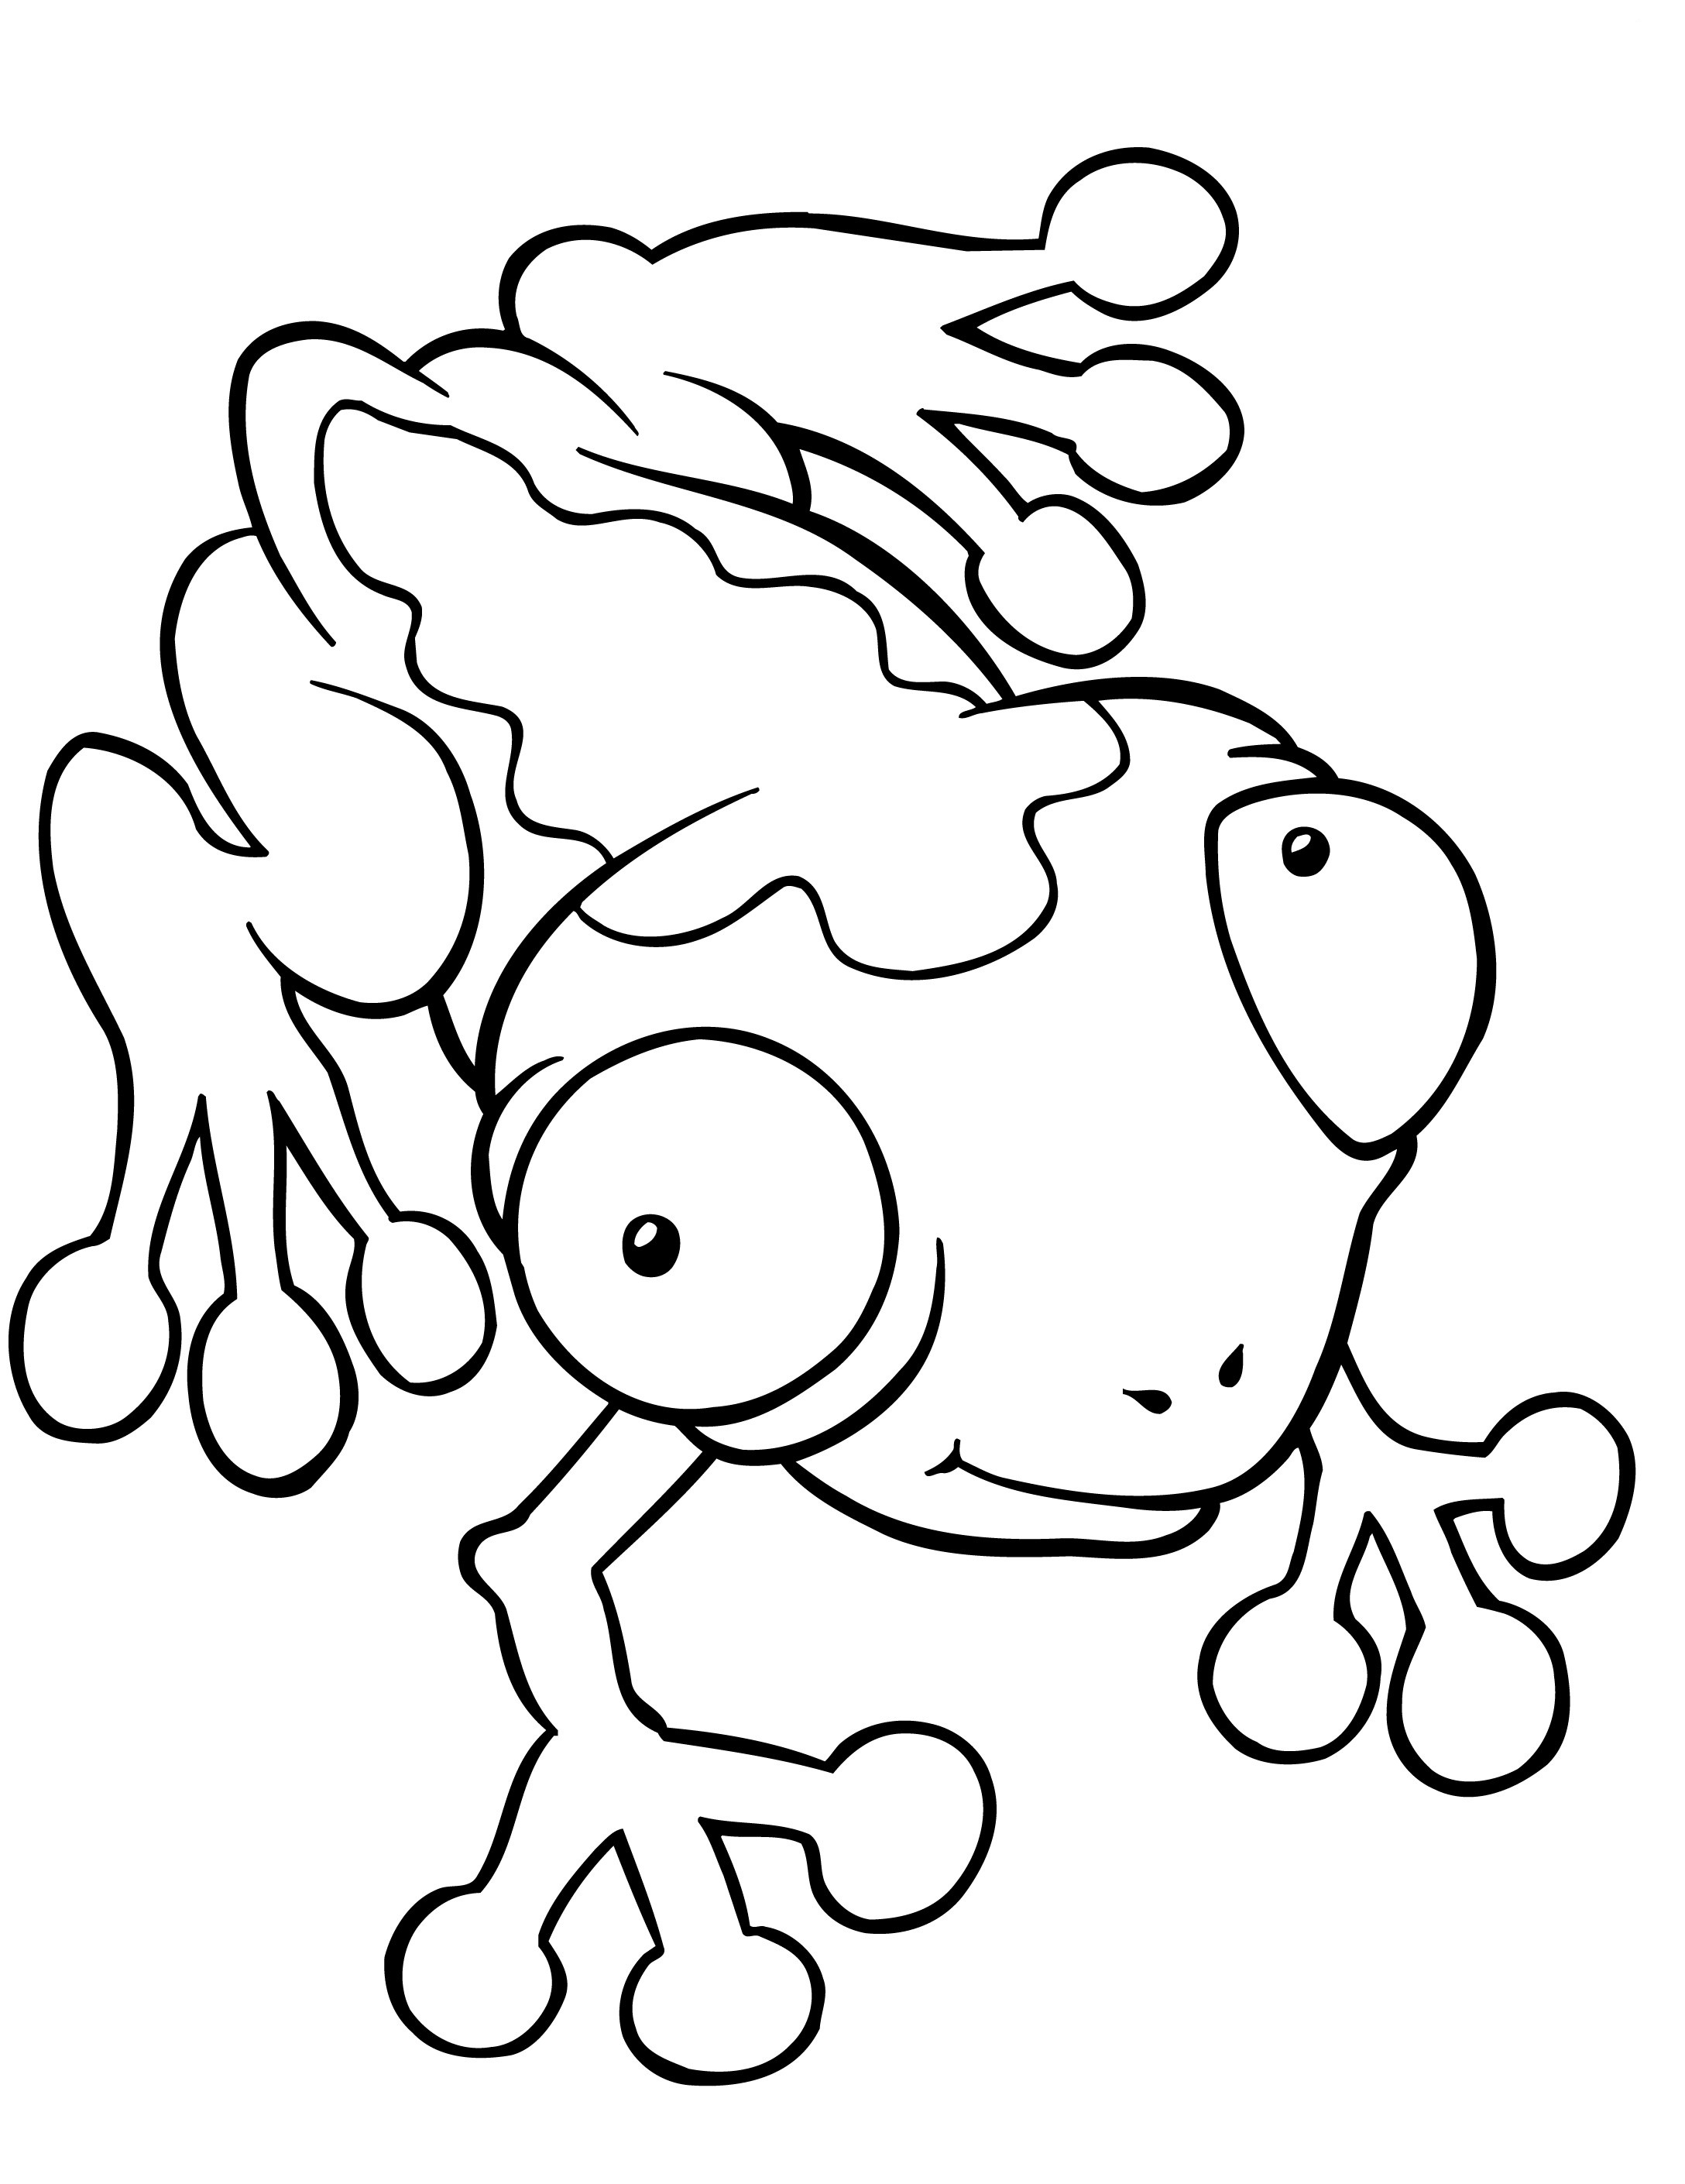 queen frog coloring pages for kids - photo #16